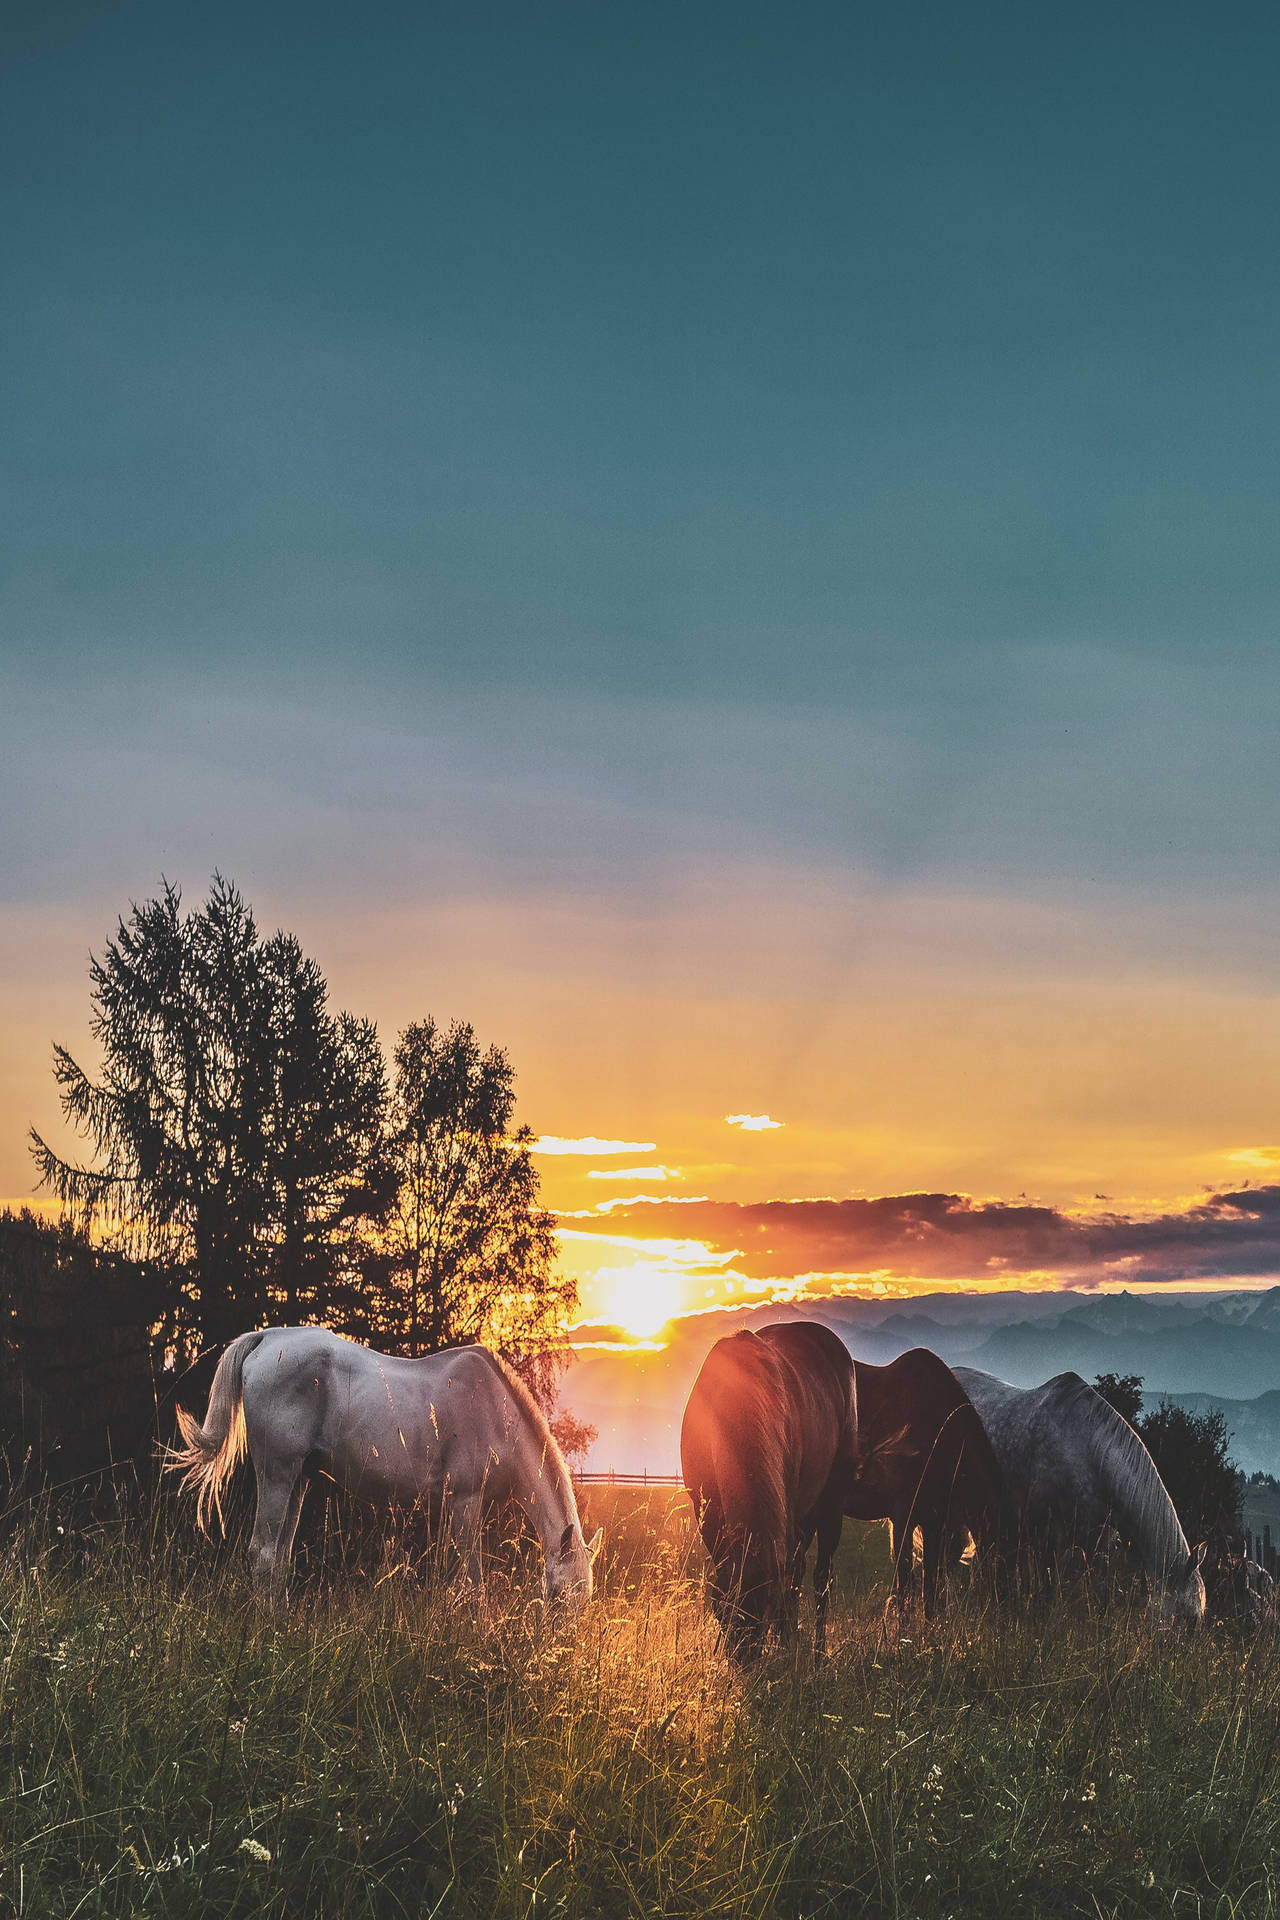 Coolest Iphone Sunset And Horses Background